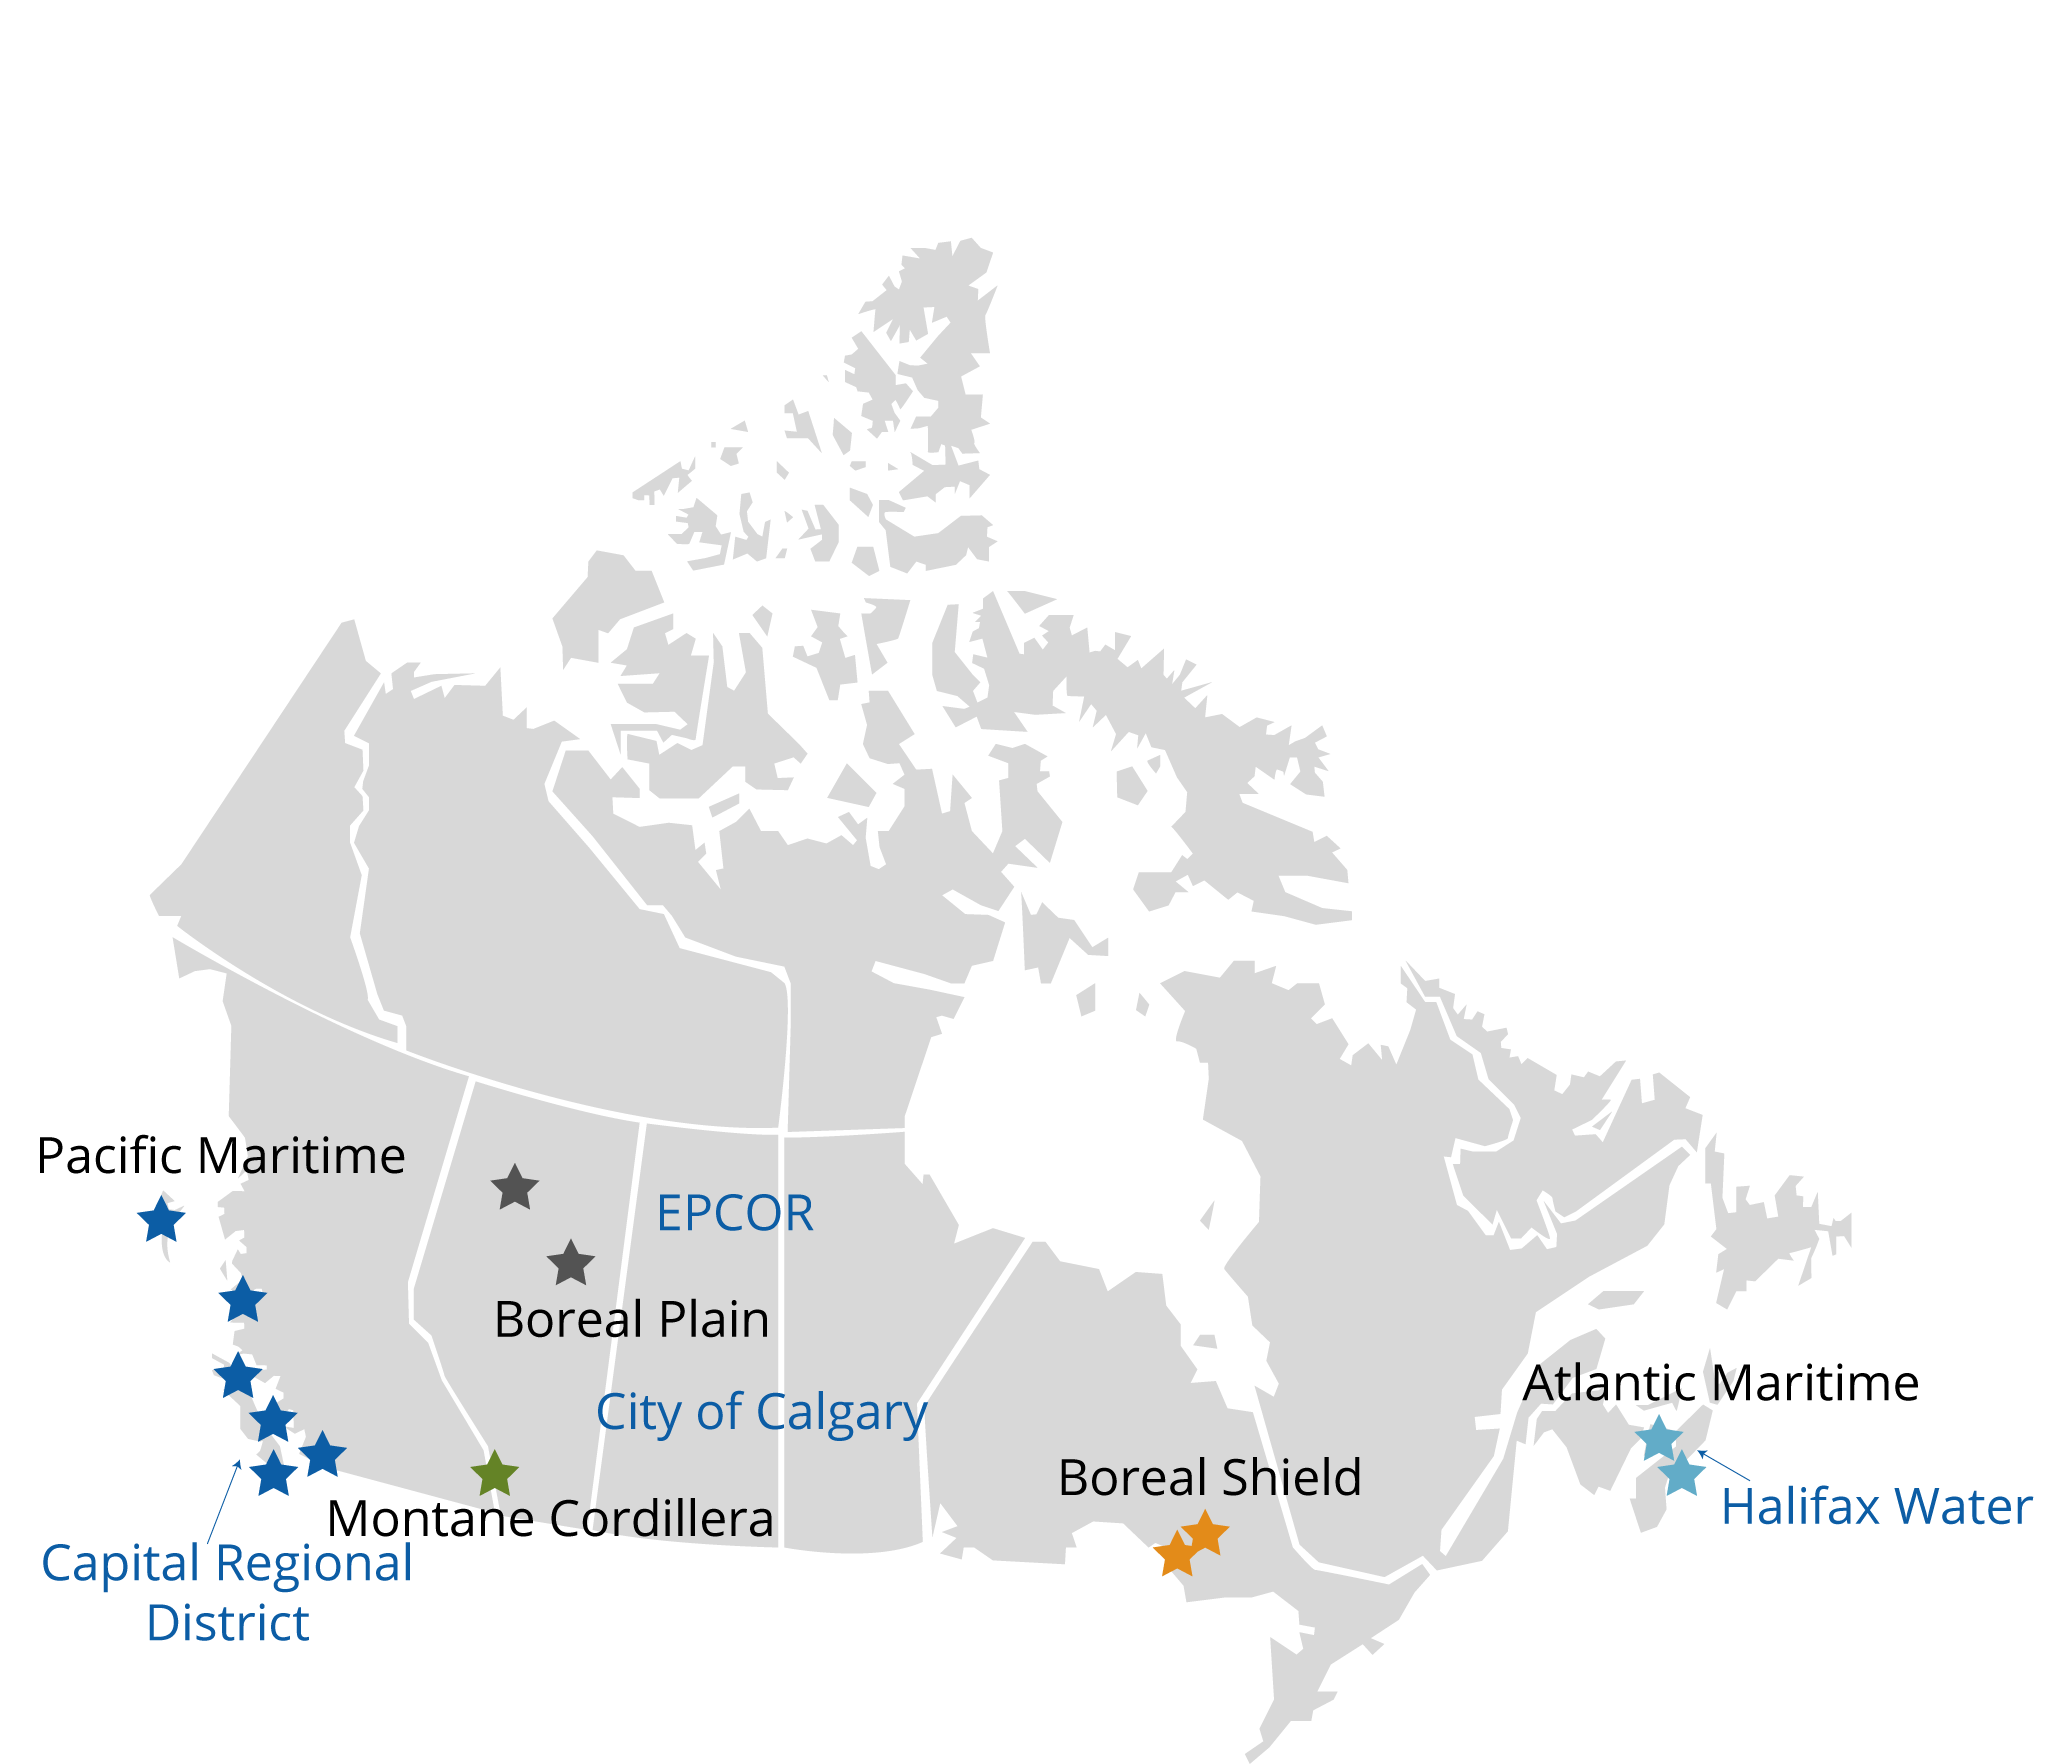 Map of Canada with locations of forWater study sites and participating institutions.